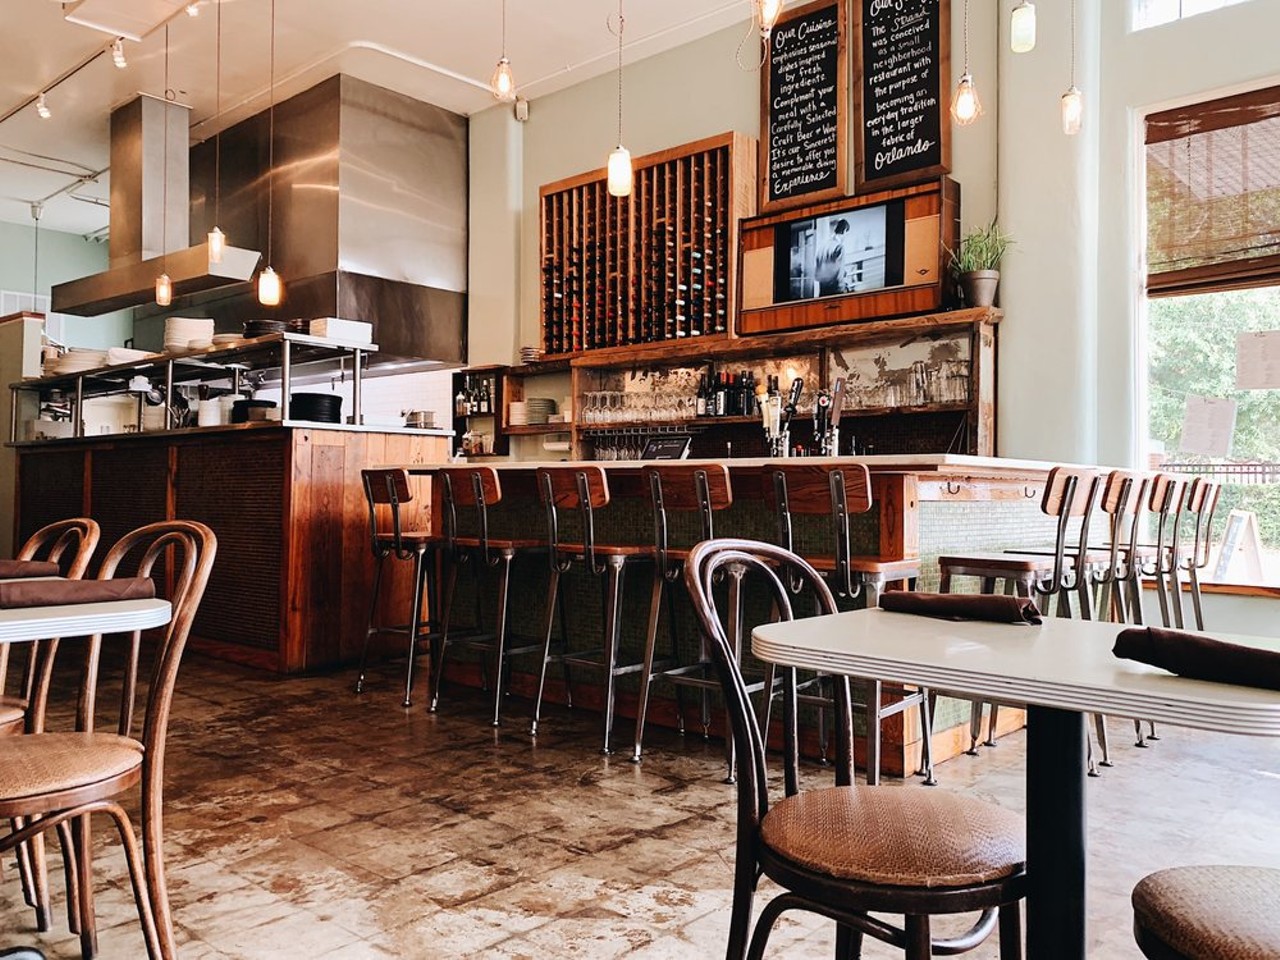 The Strand
807 N. Mills Ave.
The Strand has embedded itself in Orlando’s restaurant scene with dishes made from scratch and daily specials using fresh, seasonal ingredients. This popular joint also keeps a rotating inventory of craft beers and wine.